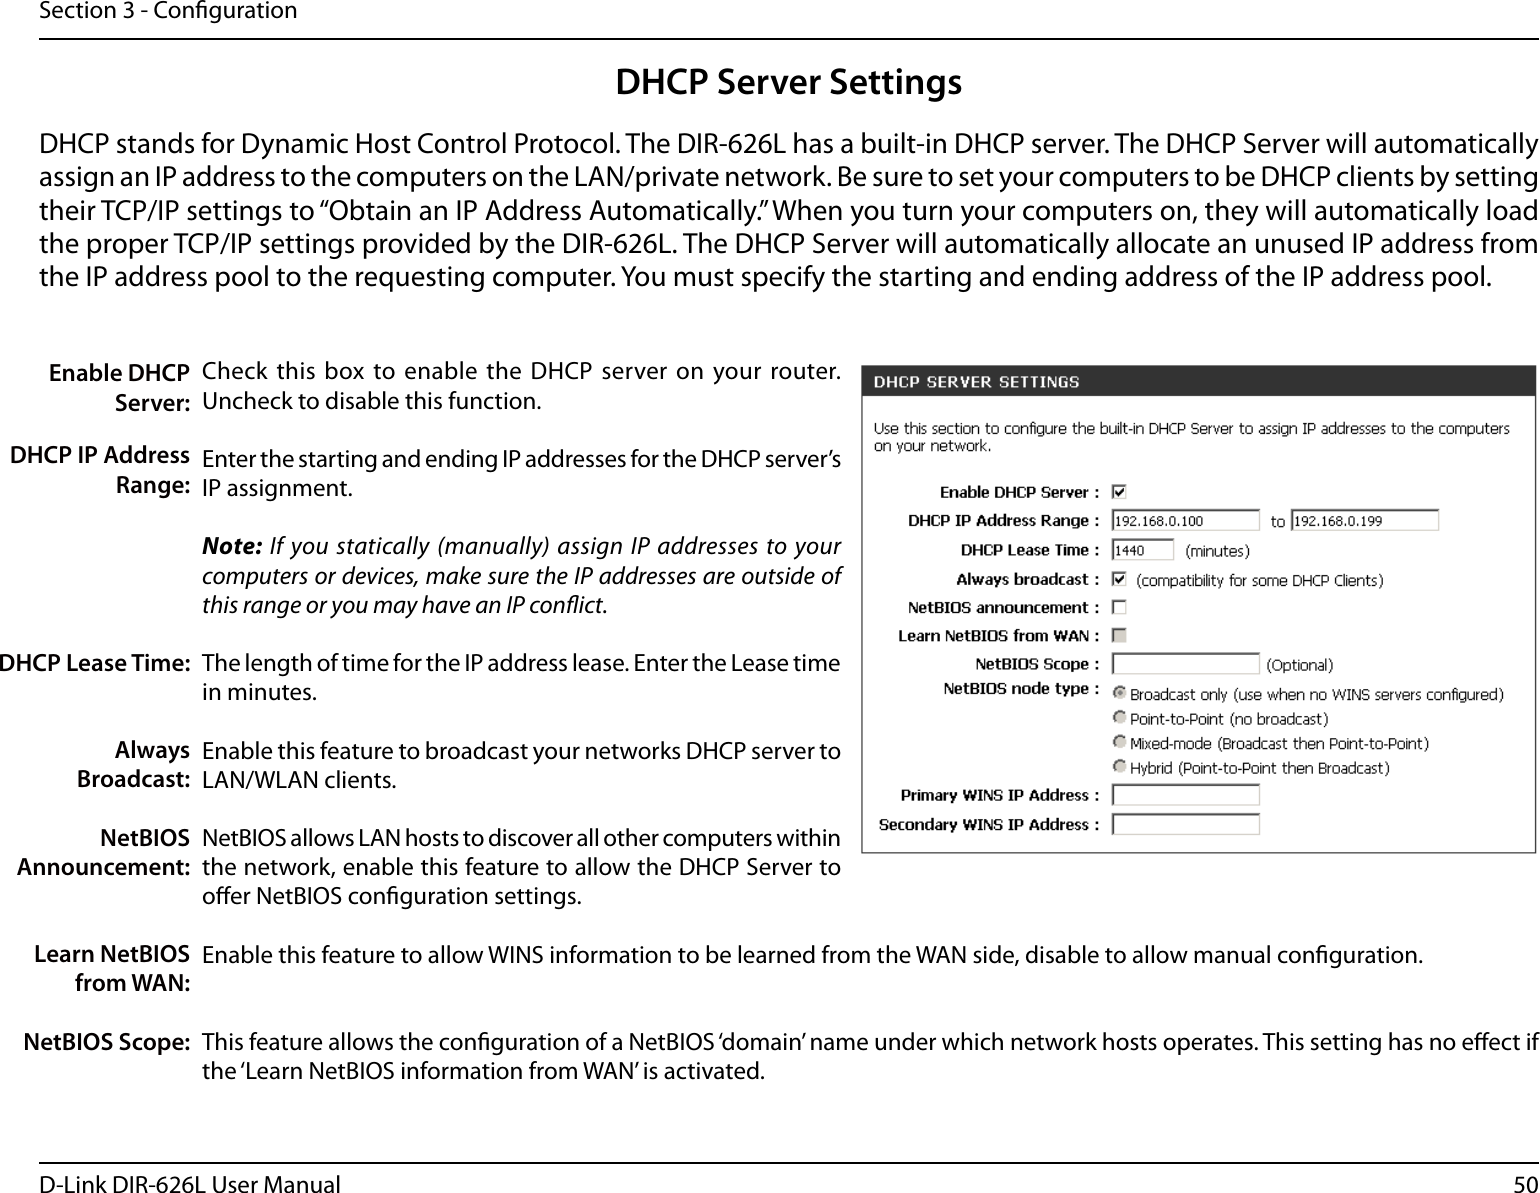 50D-Link DIR-626L User ManualSection 3 - CongurationDHCP Server SettingsDHCP stands for Dynamic Host Control Protocol. The DIR-626L has a built-in DHCP server. The DHCP Server will automatically assign an IP address to the computers on the LAN/private network. Be sure to set your computers to be DHCP clients by setting their TCP/IP settings to “Obtain an IP Address Automatically.” When you turn your computers on, they will automatically load the proper TCP/IP settings provided by the DIR-626L. The DHCP Server will automatically allocate an unused IP address from the IP address pool to the requesting computer. You must specify the starting and ending address of the IP address pool.Check this  box to enable the DHCP server on  your router. Uncheck to disable this function.Enter the starting and ending IP addresses for the DHCP server’s IP assignment.Note: If you statically (manually) assign IP addresses to your computers or devices, make sure the IP addresses are outside of this range or you may have an IP conict. The length of time for the IP address lease. Enter the Lease time in minutes.Enable this feature to broadcast your networks DHCP server to LAN/WLAN clients.NetBIOS allows LAN hosts to discover all other computers within the network, enable this feature to allow the DHCP Server to oer NetBIOS conguration settings.Enable this feature to allow WINS information to be learned from the WAN side, disable to allow manual conguration.This feature allows the conguration of a NetBIOS ‘domain’ name under which network hosts operates. This setting has no eect if the ‘Learn NetBIOS information from WAN’ is activated.Enable DHCP Server:DHCP IP Address Range:DHCP Lease Time:Always Broadcast:NetBIOS Announcement:Learn NetBIOS from WAN:NetBIOS Scope: